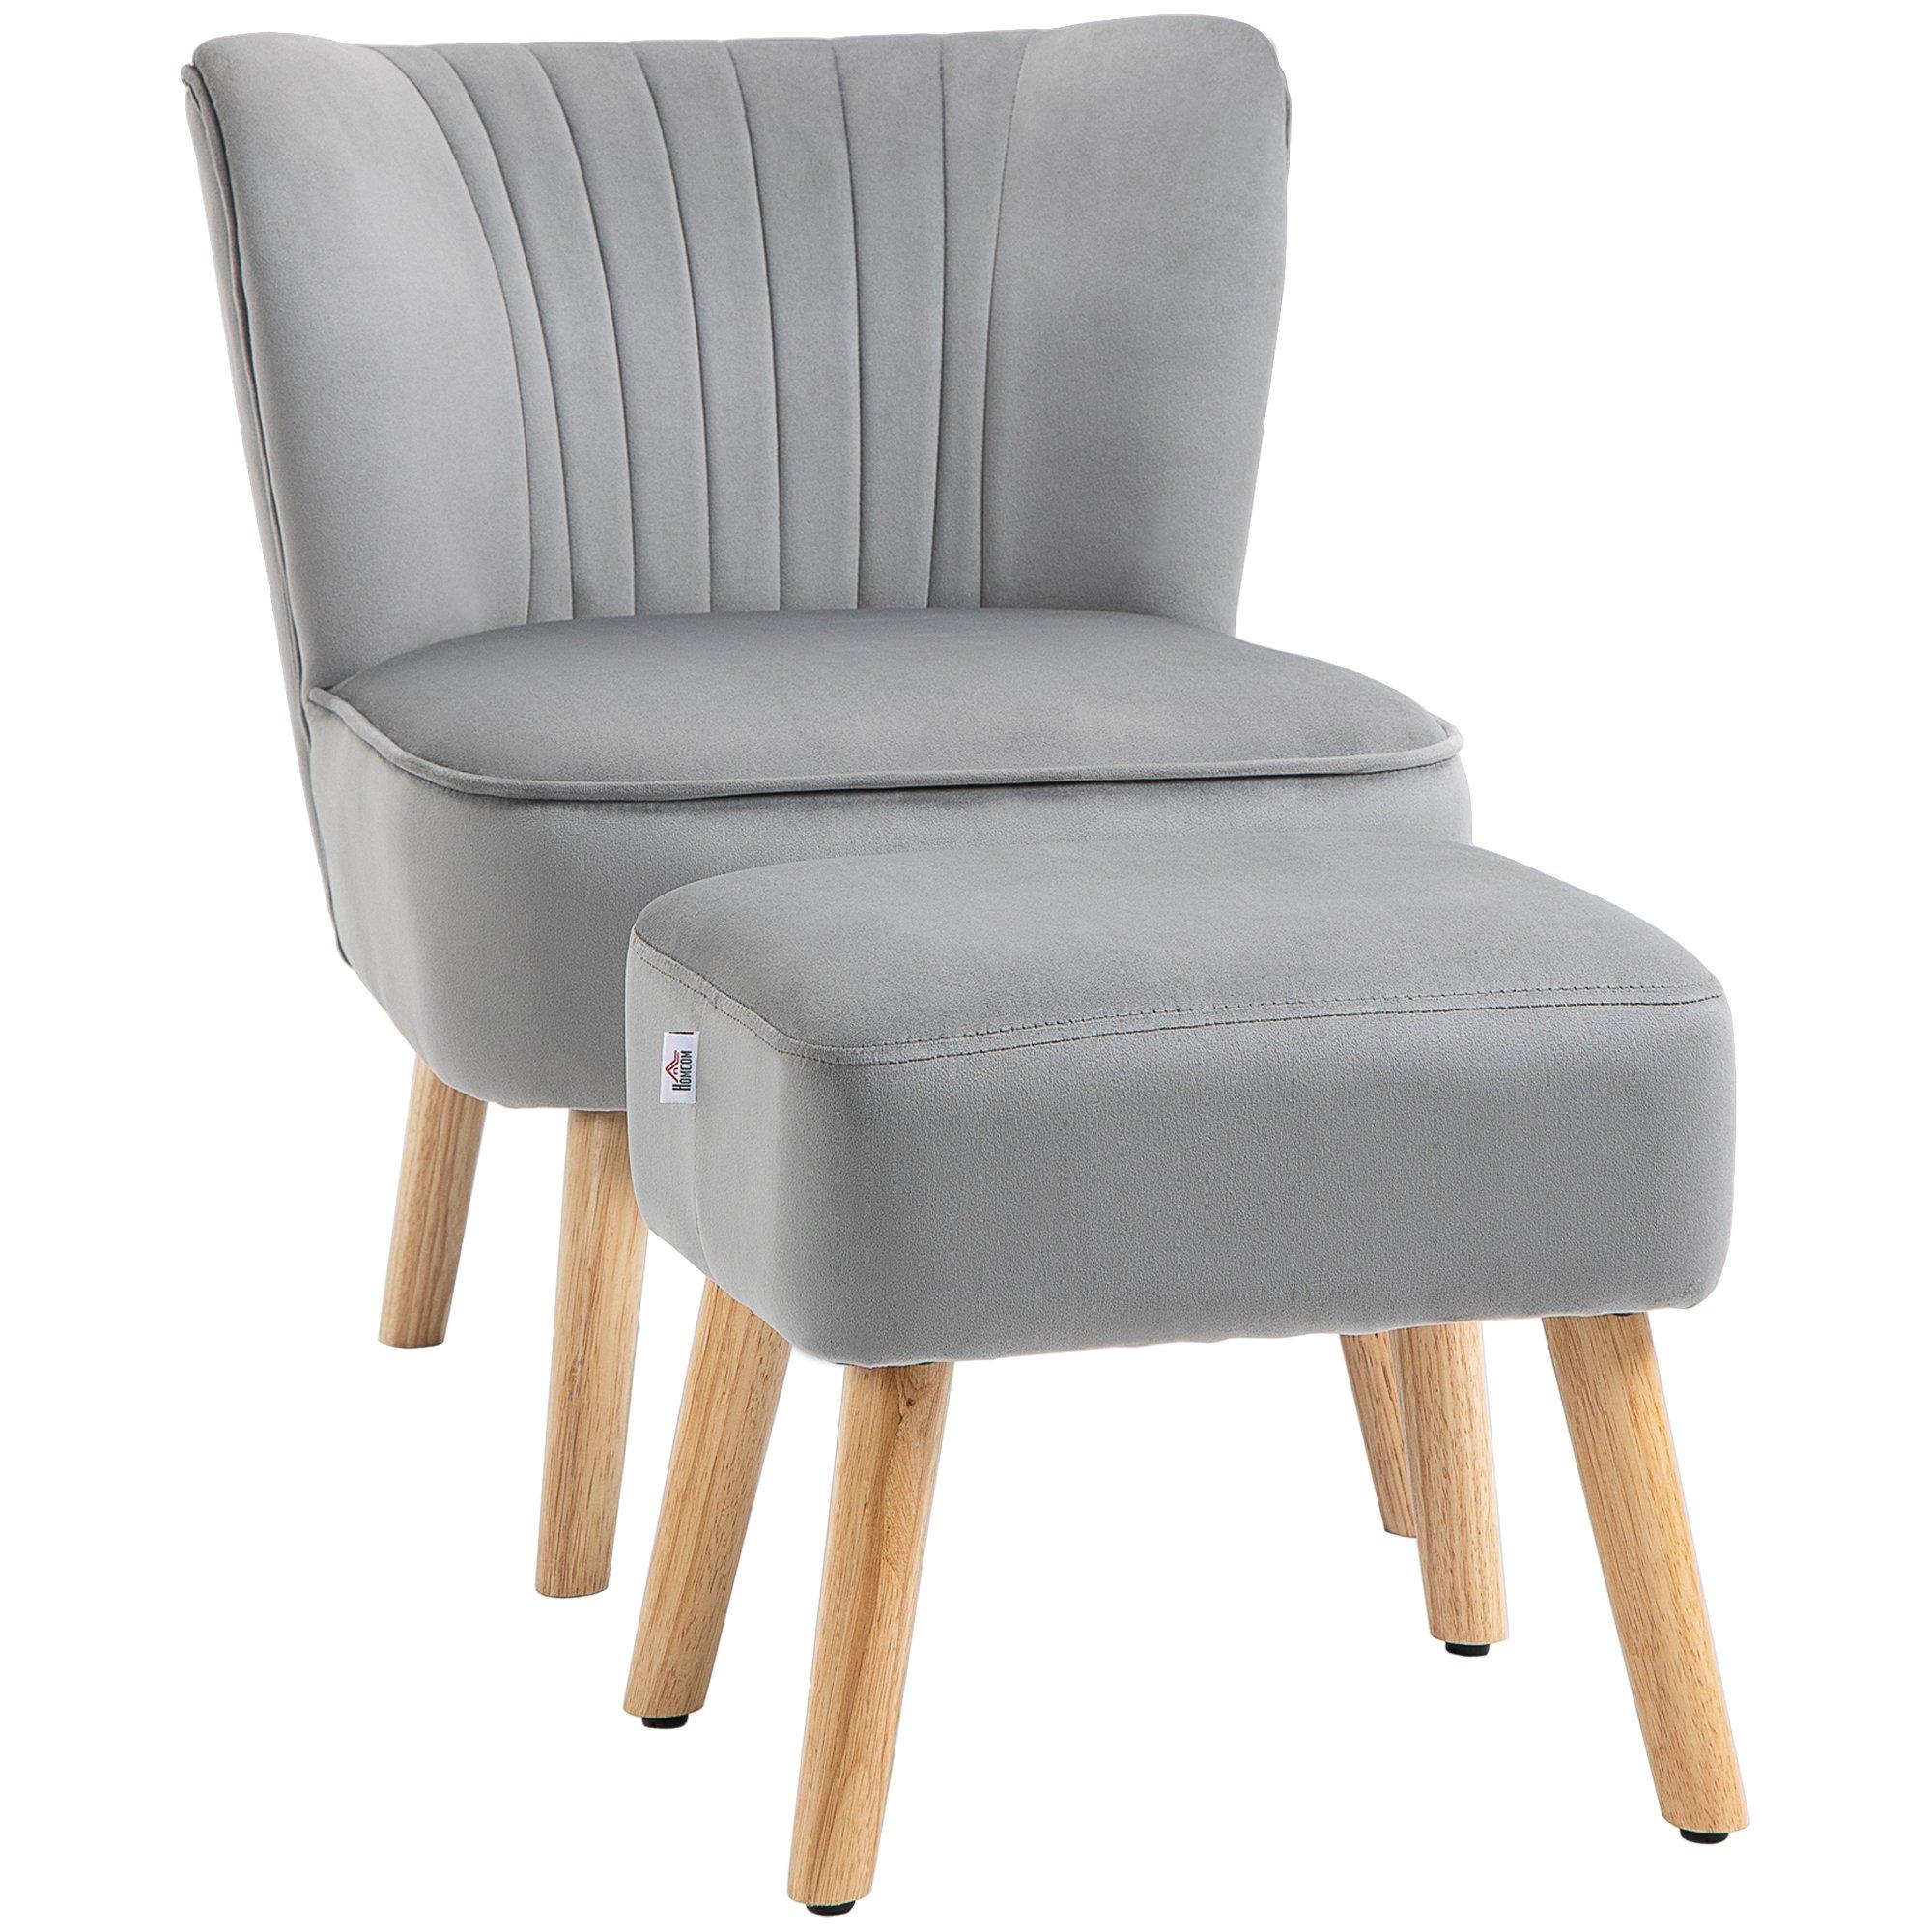 Velvet-Feel Accent Chair with Ottoman Tub Seat Padding Wood Frame